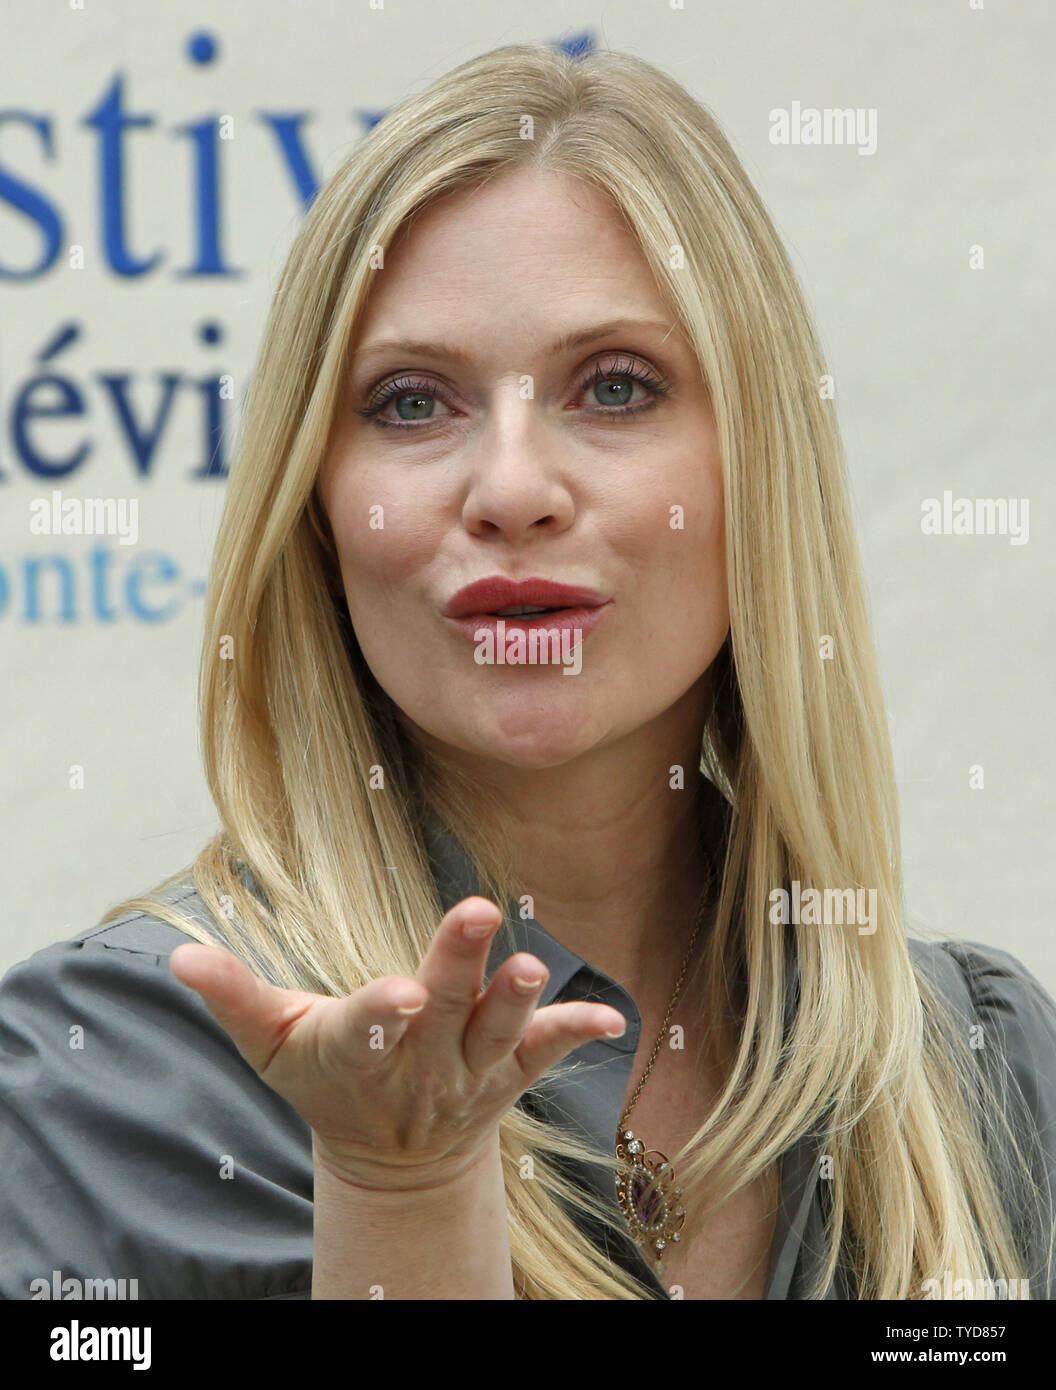 Actress Emily Proctor blows a kiss during a photocall for the television show 'CSI:  Miami' at the 49th Monte Carlo Television Festival in Monte Carlo, Monaco on June 11, 2009.  (UPI Photo/David Silpa) Stock Photo